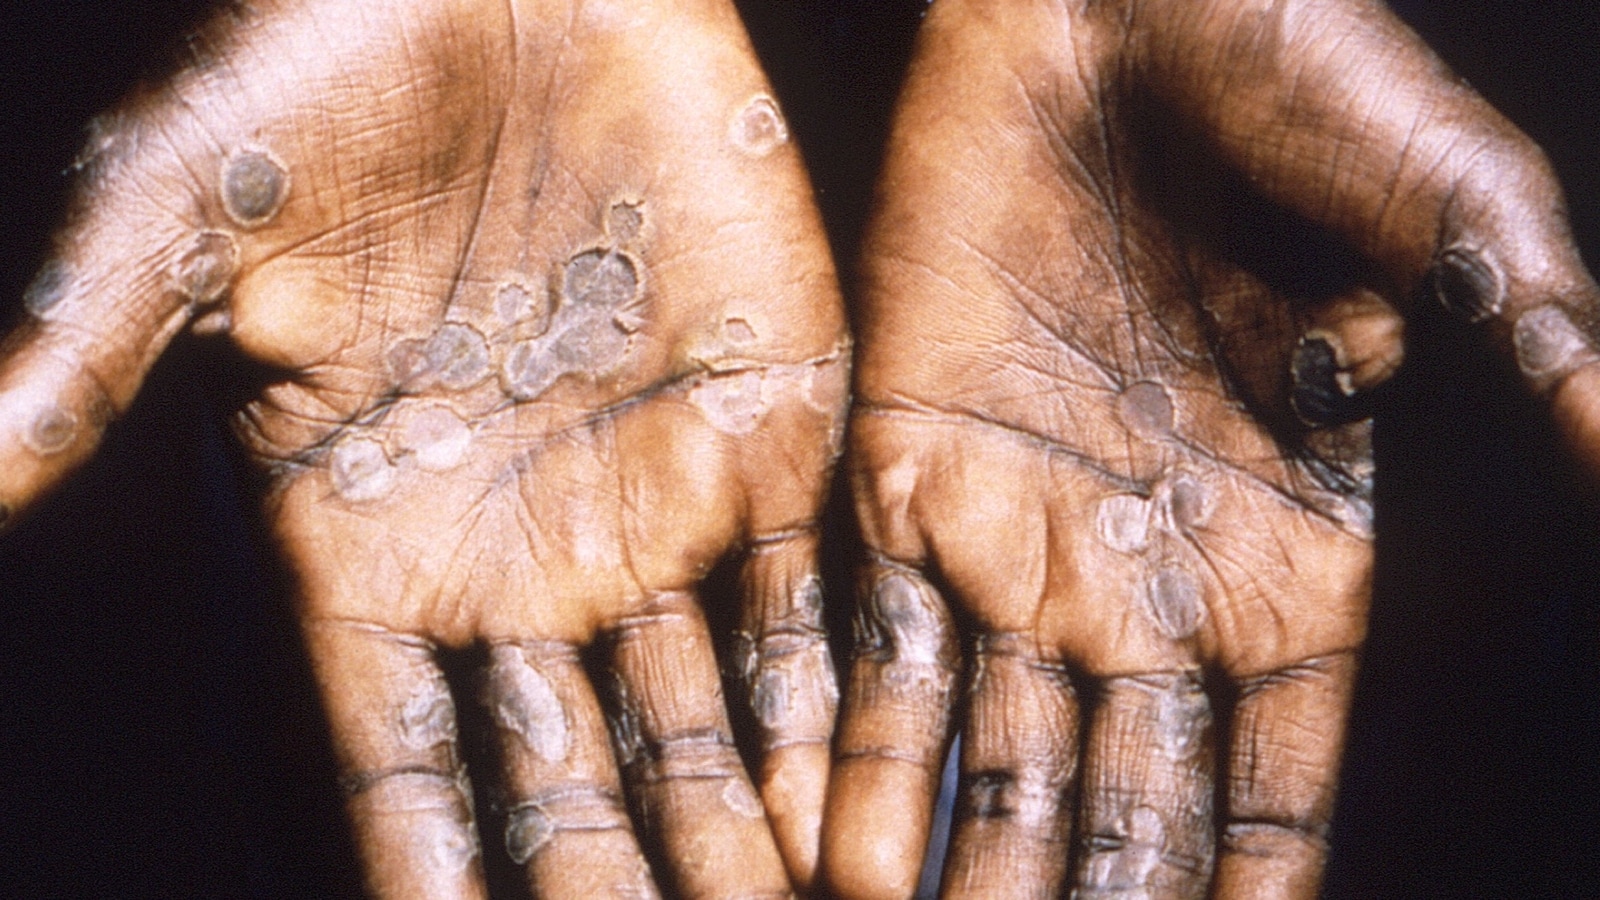 Monkeypox likely spreading among people via intimate contact